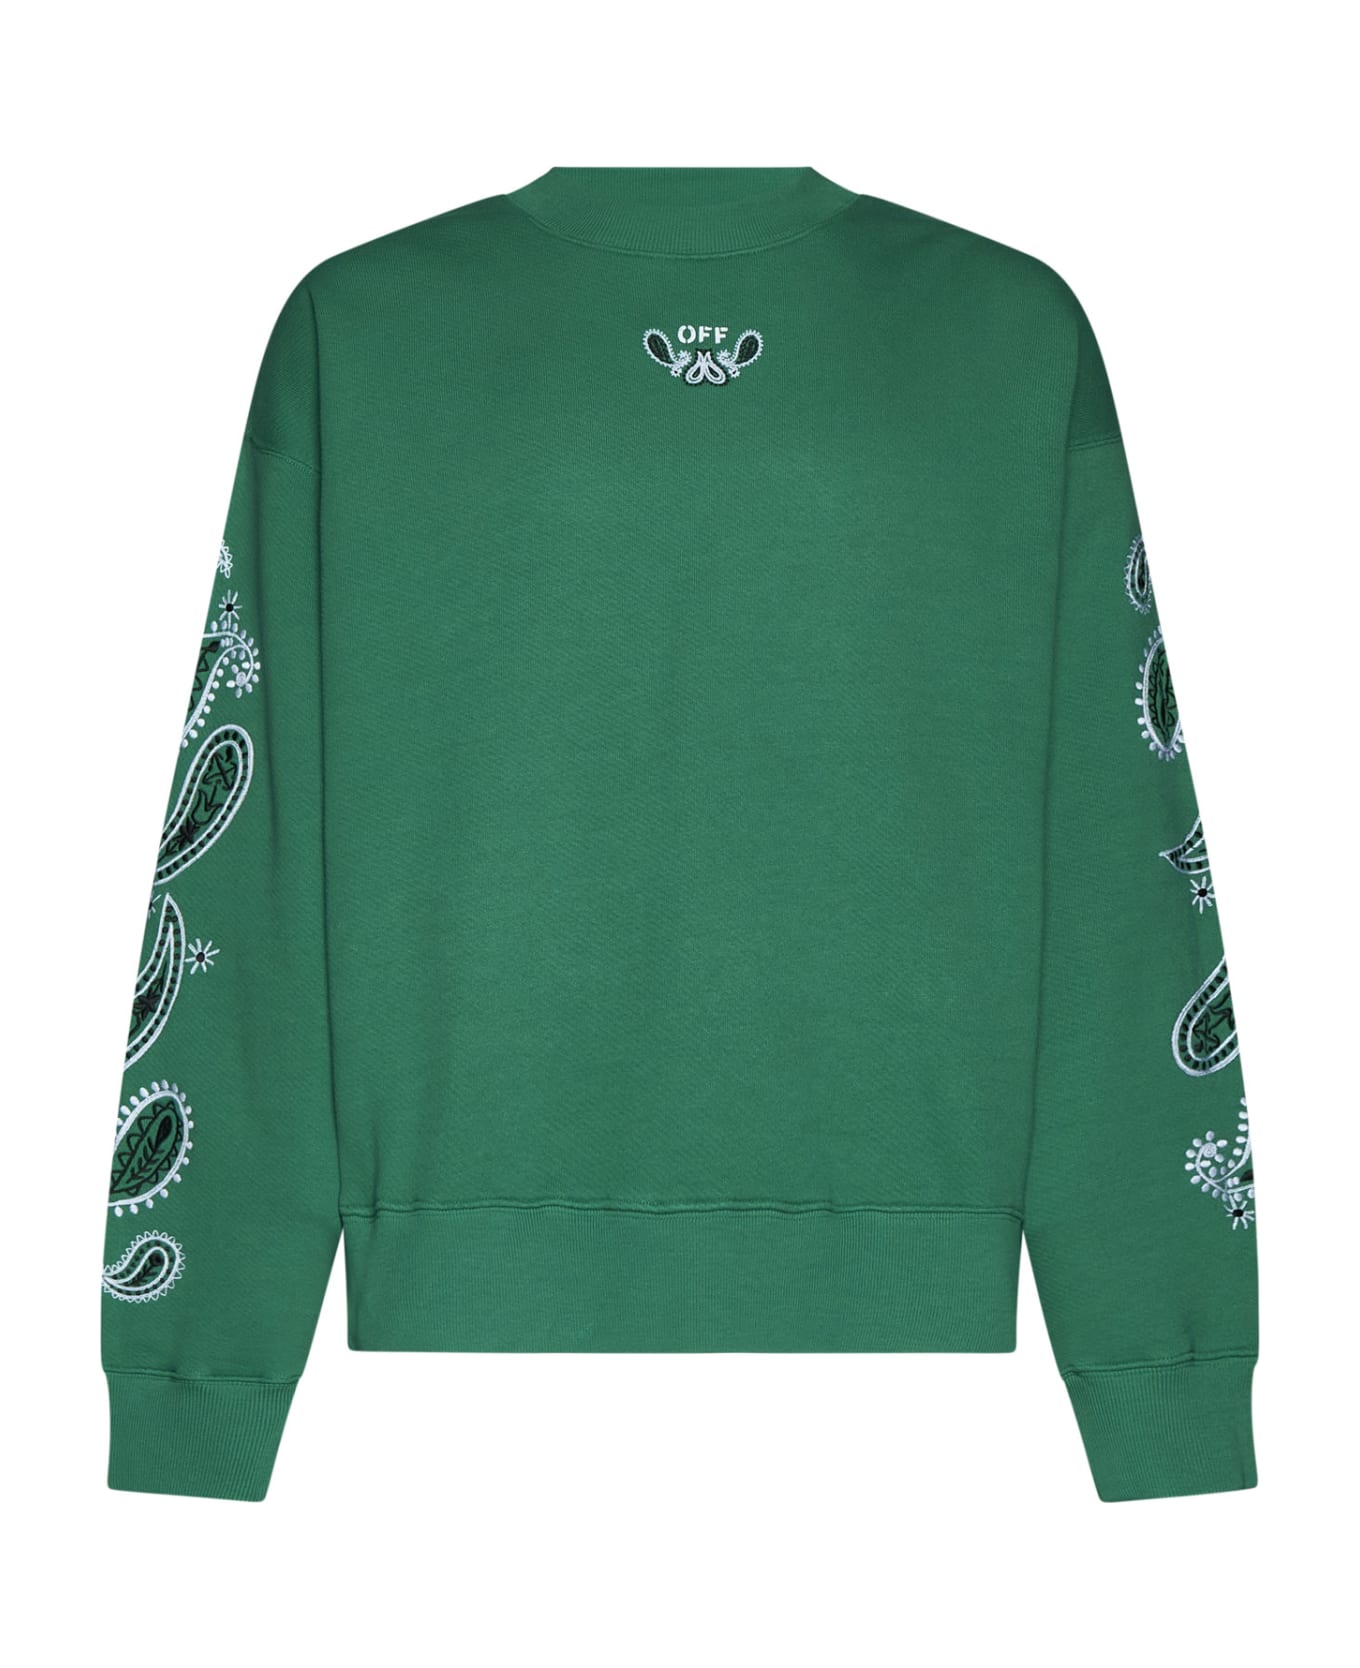 Off-White Sweater - College green フリース